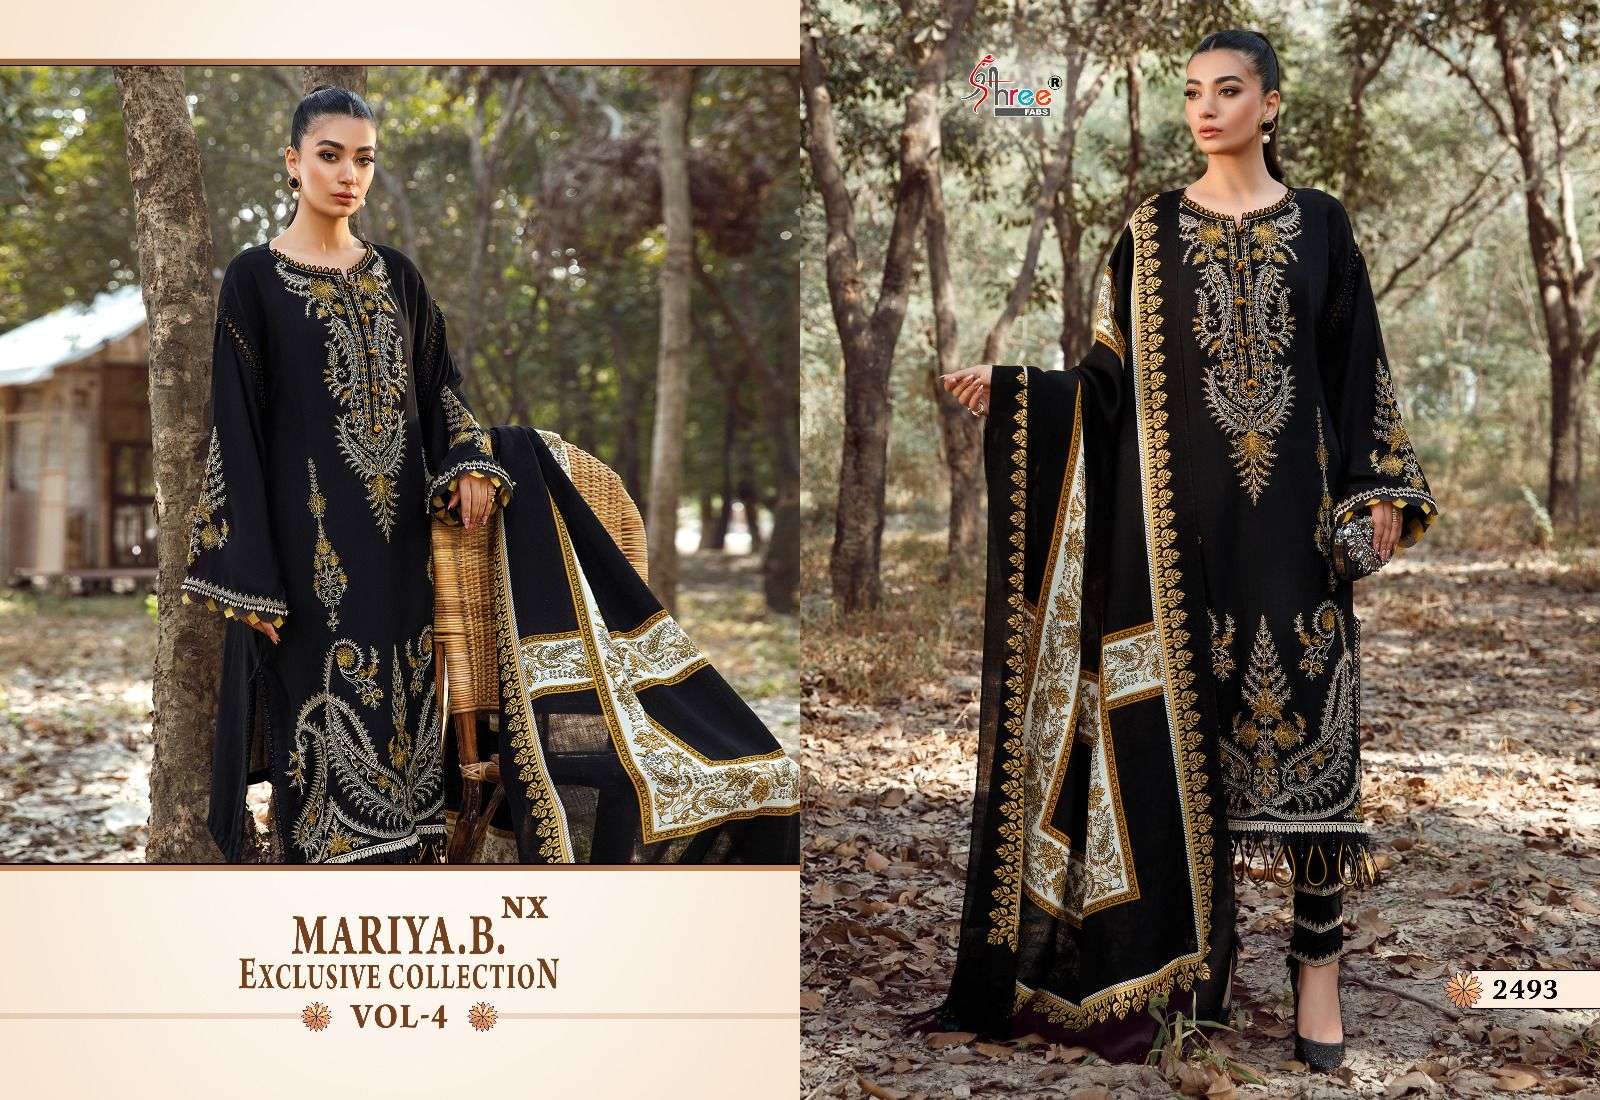 SHREE FABS MARIA B EXCLUSIVE COLLECTION VOL 4 NX